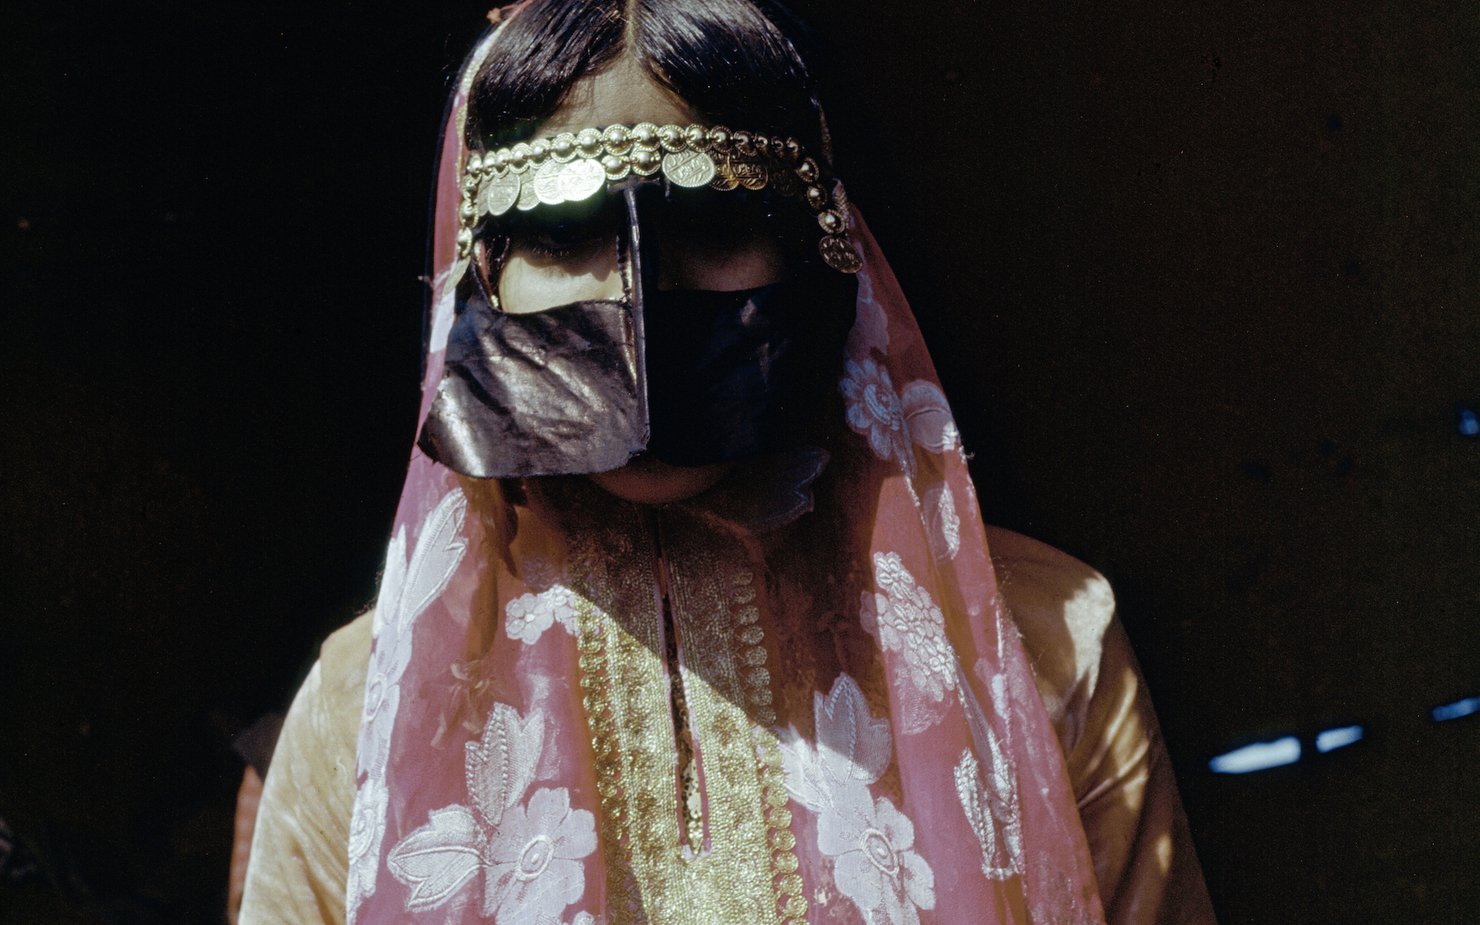 Woman wearing traditional Qatari dress and face covering